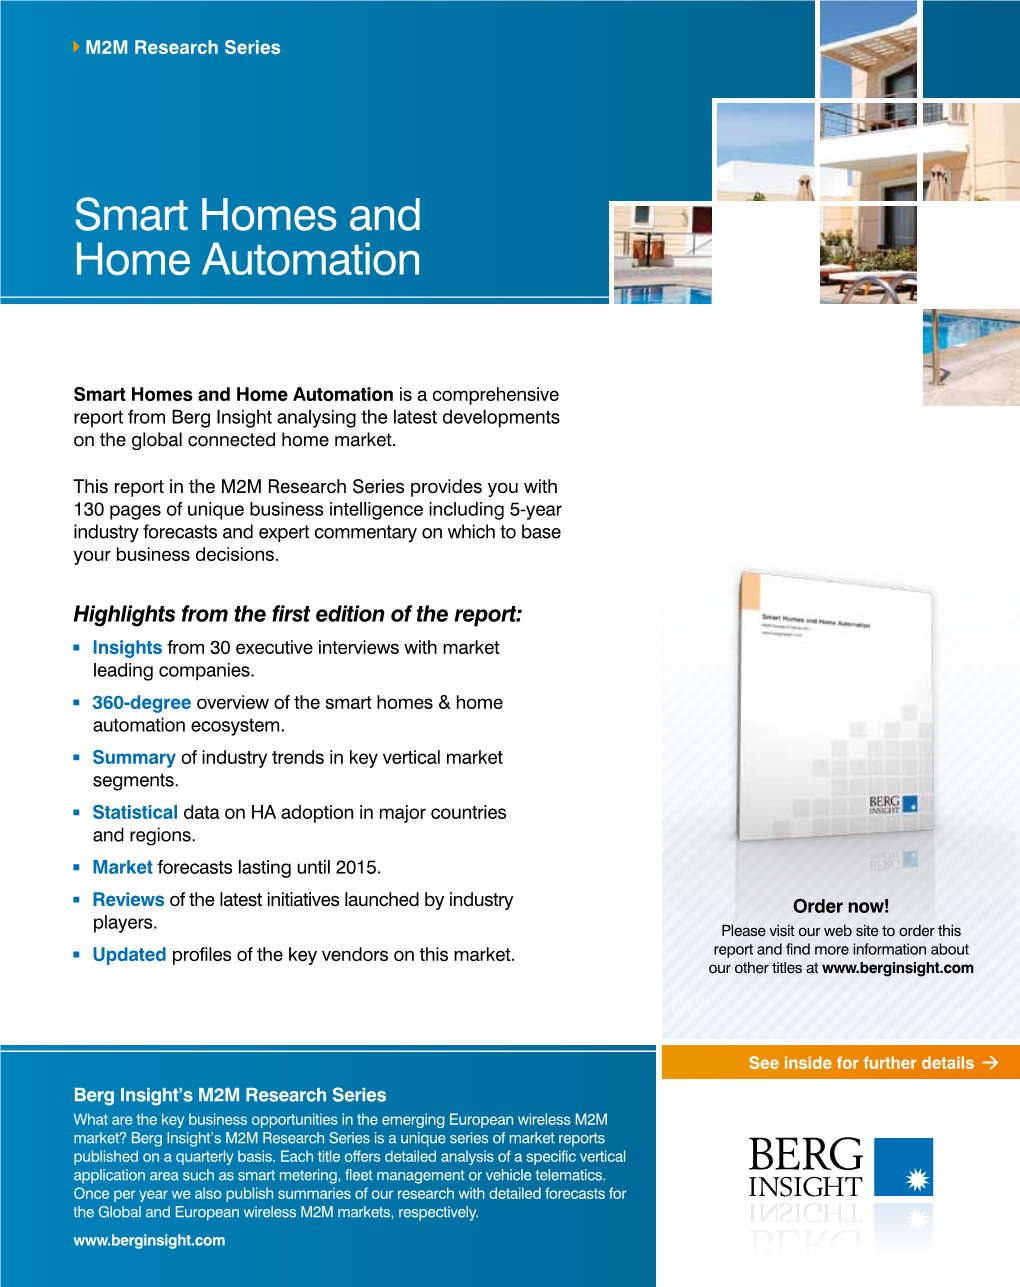 Smart Homes and Home Automation